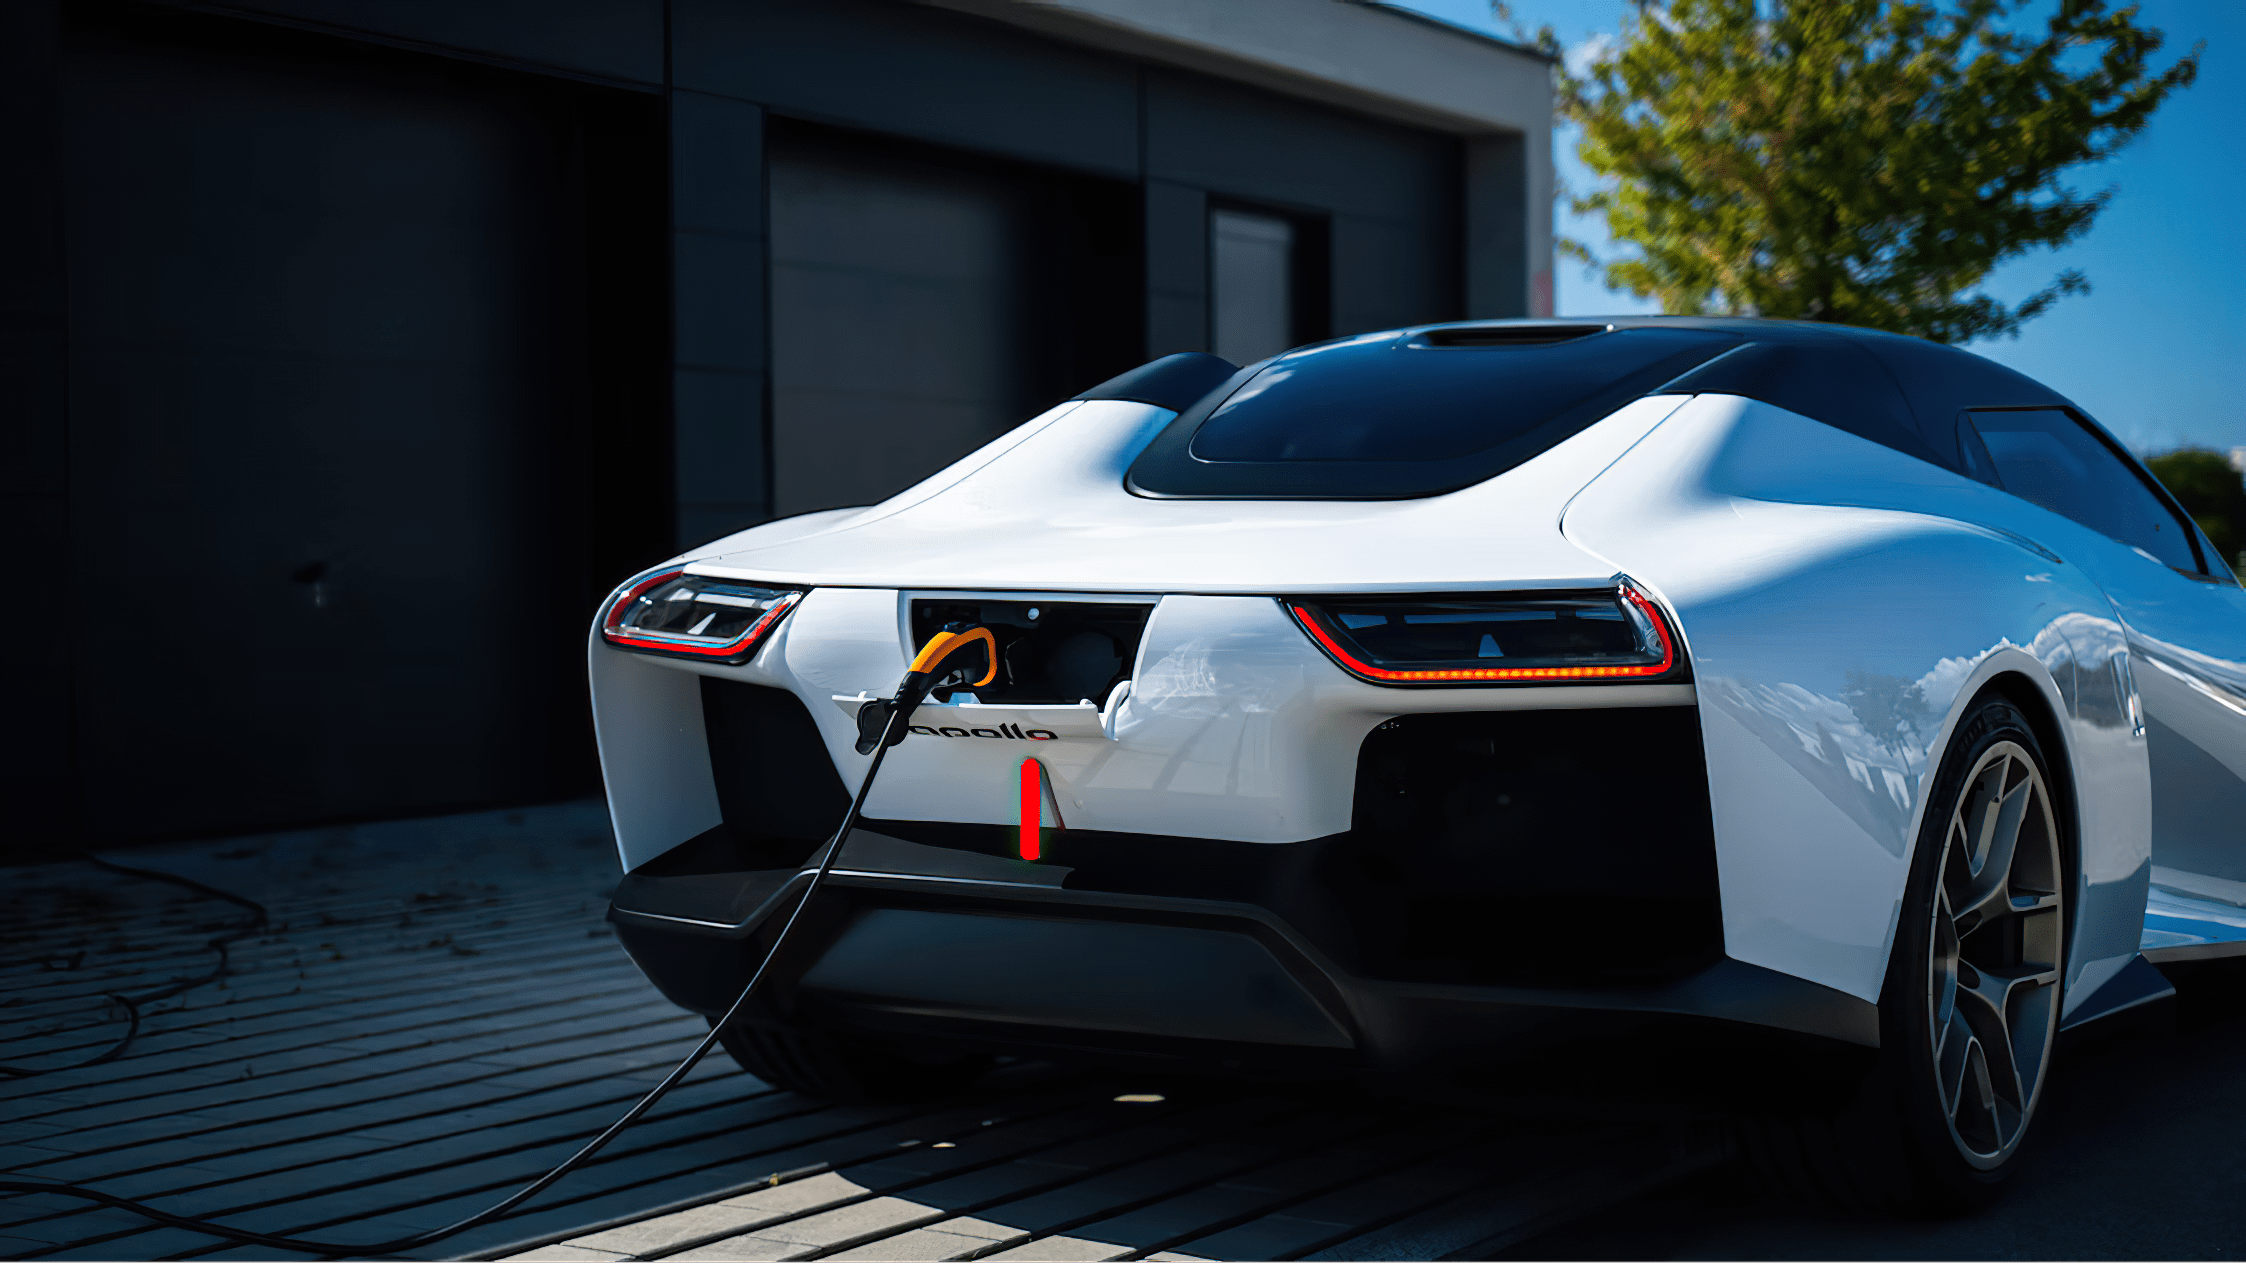 The Apollo G2J Electric Prototype, Testbed for Future Hypercars